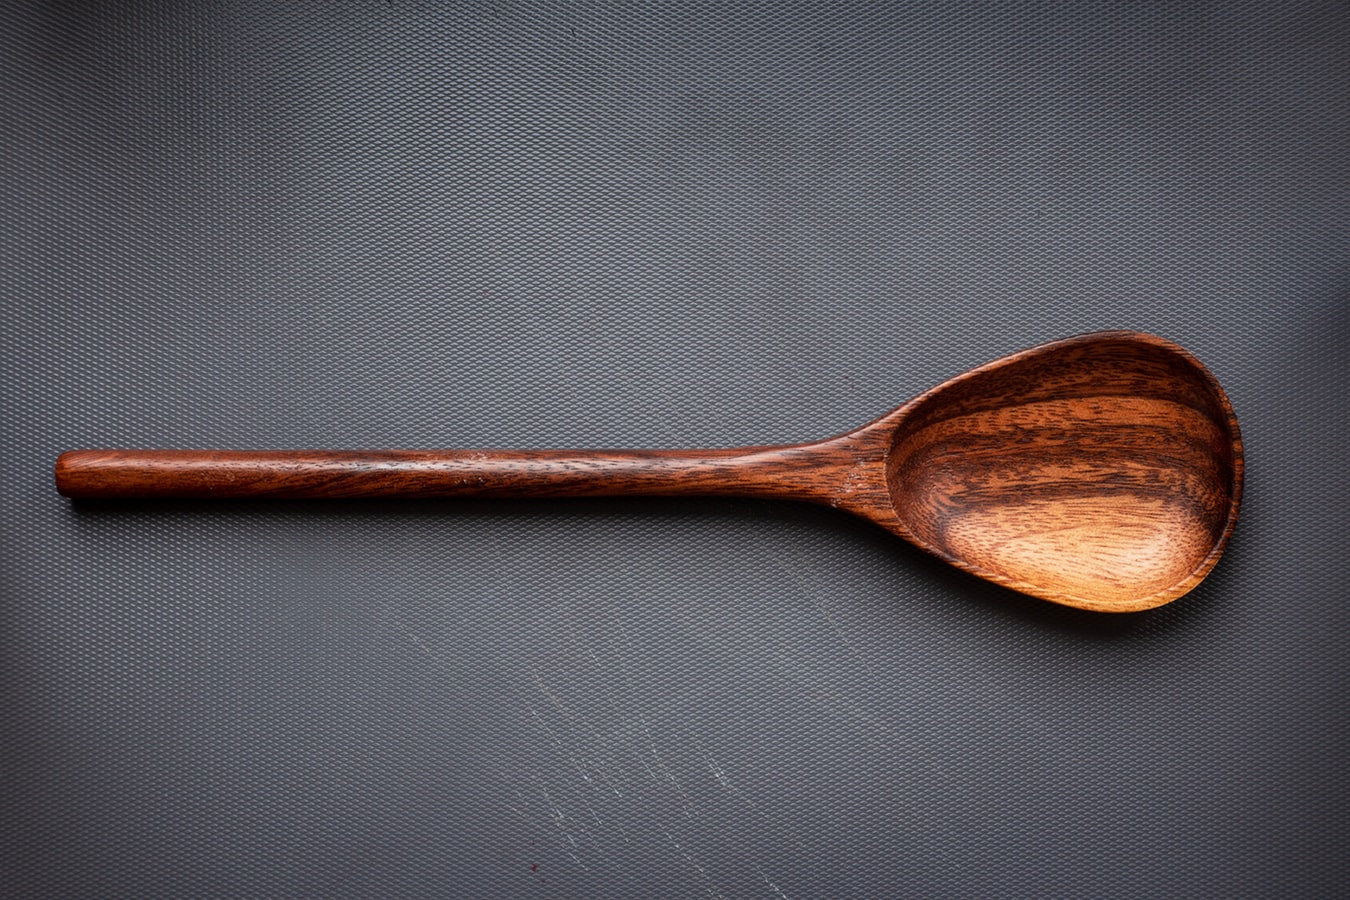 The Big Ass Wooden Spoon